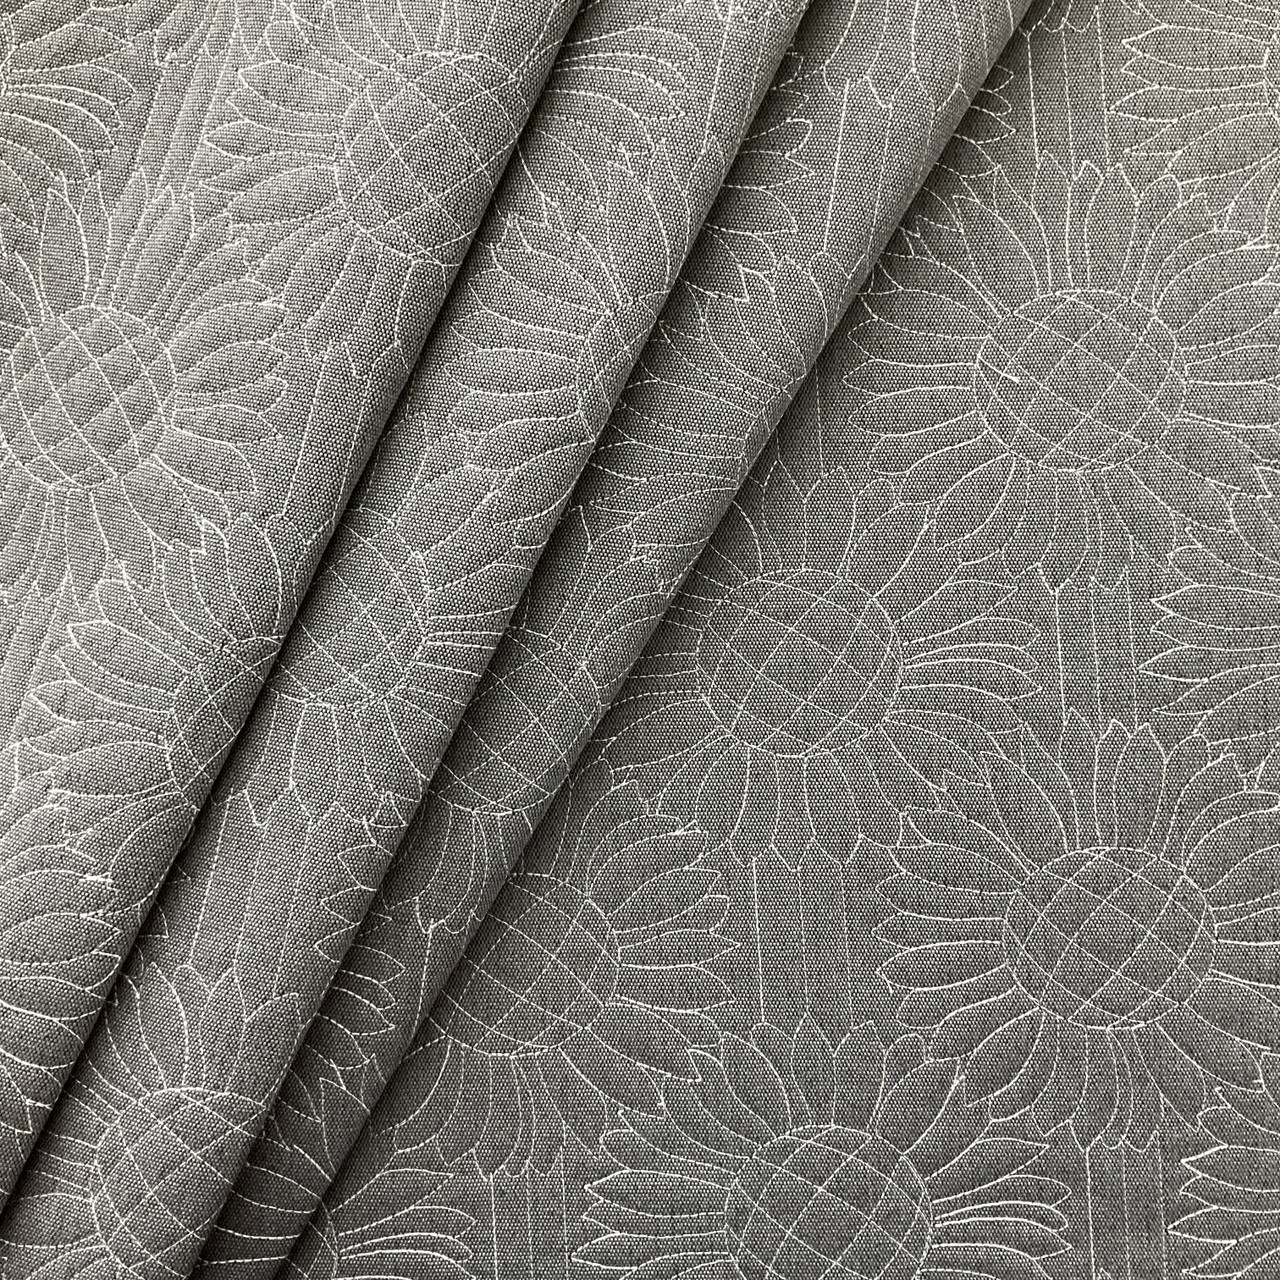 Performatex Q-Daisy Outdoor Woven | Charcoal Gray and White Sunflower  design pre-quilted | Medium Weight Outdoor, Woven Fabric | Home Decor  Fabric 